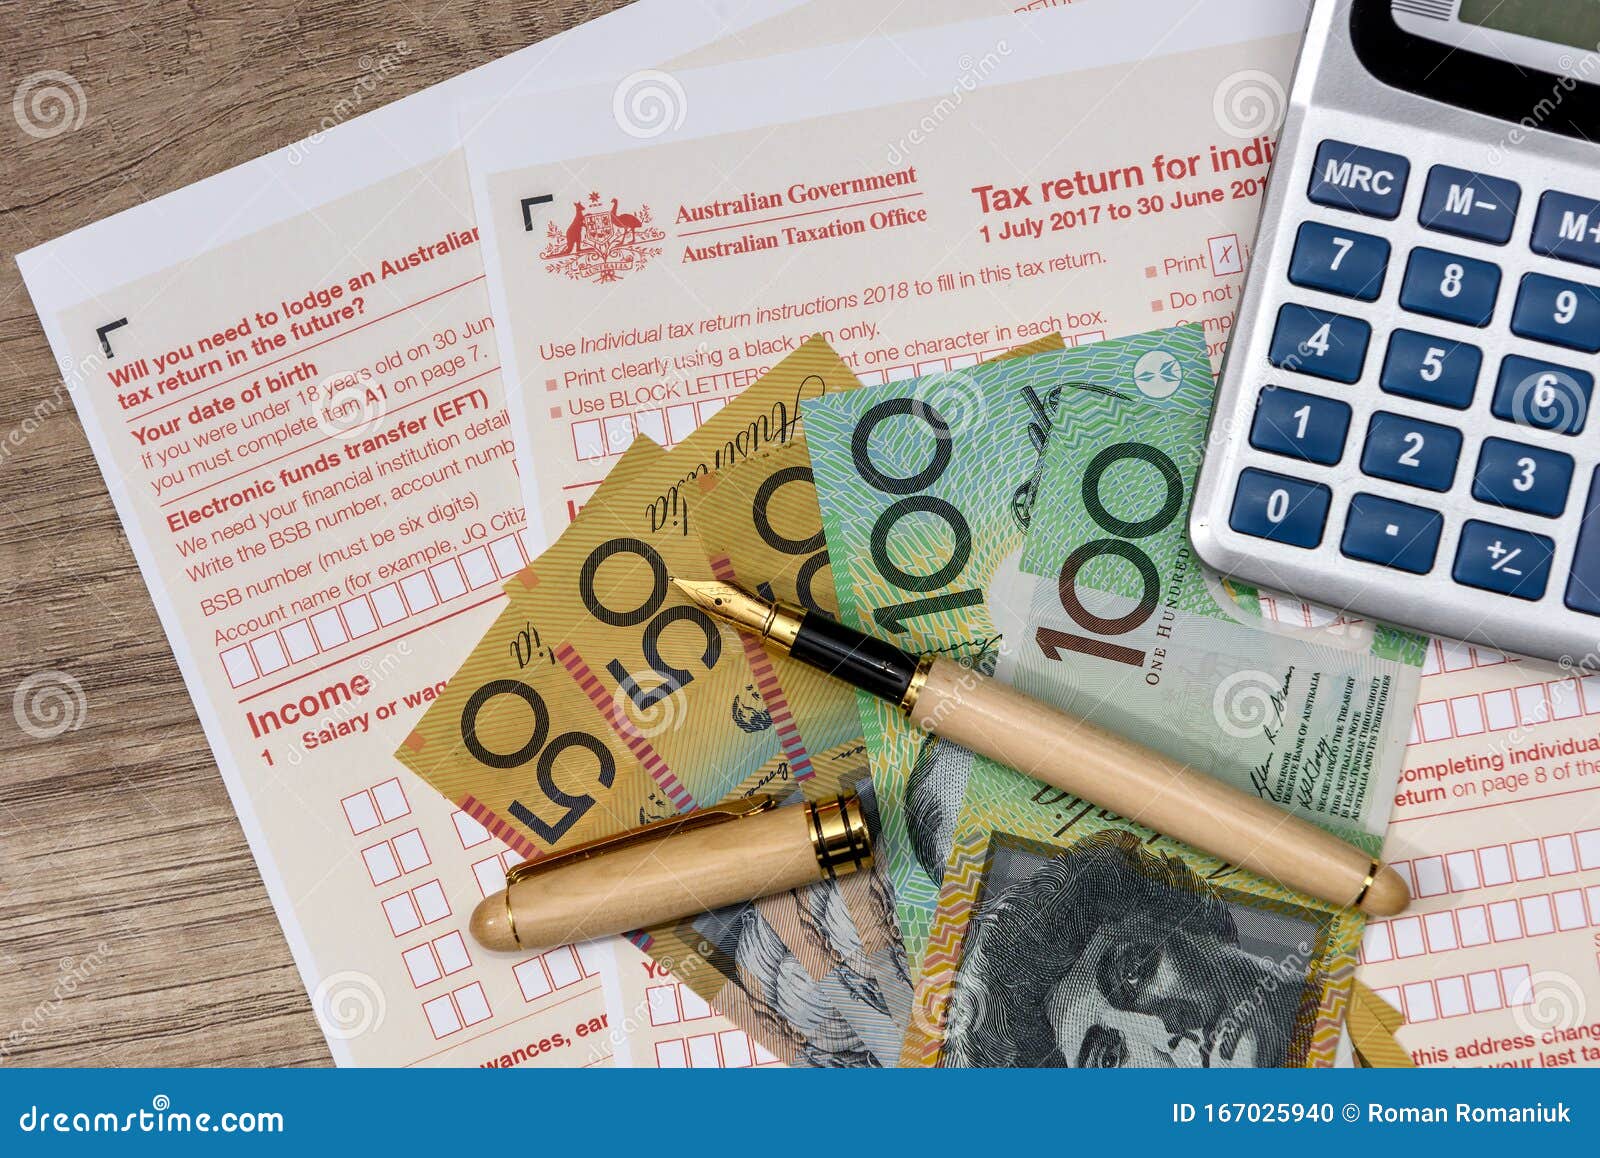 australian-dollars-with-calculator-and-tax-form-editorial-image-image